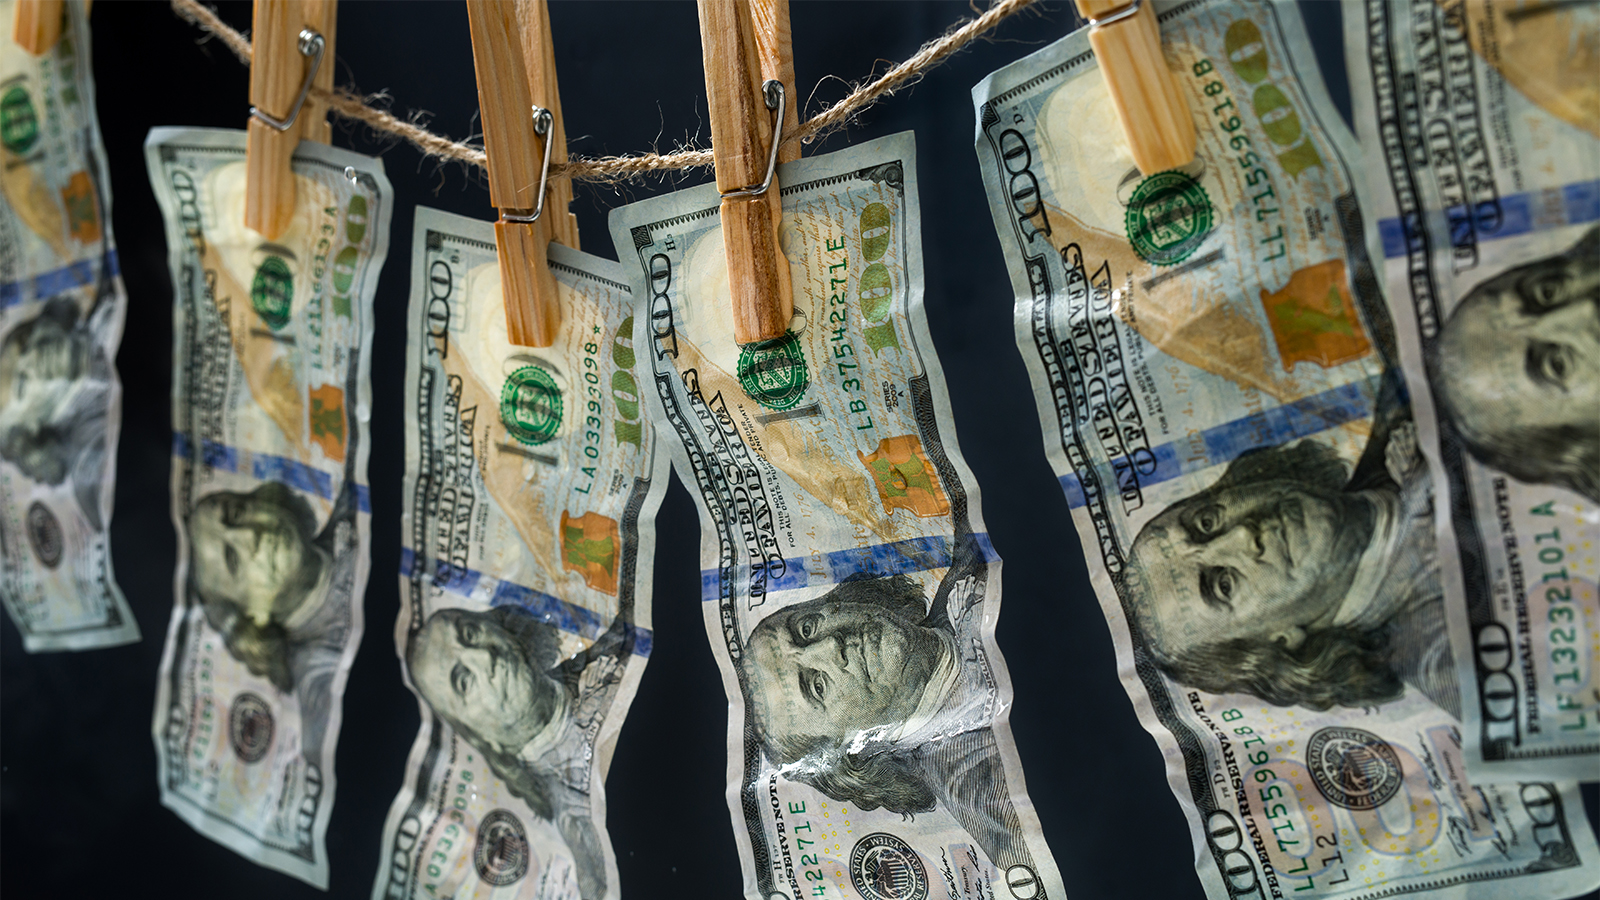 What is Smurfing in Money Laundering? - Youverify